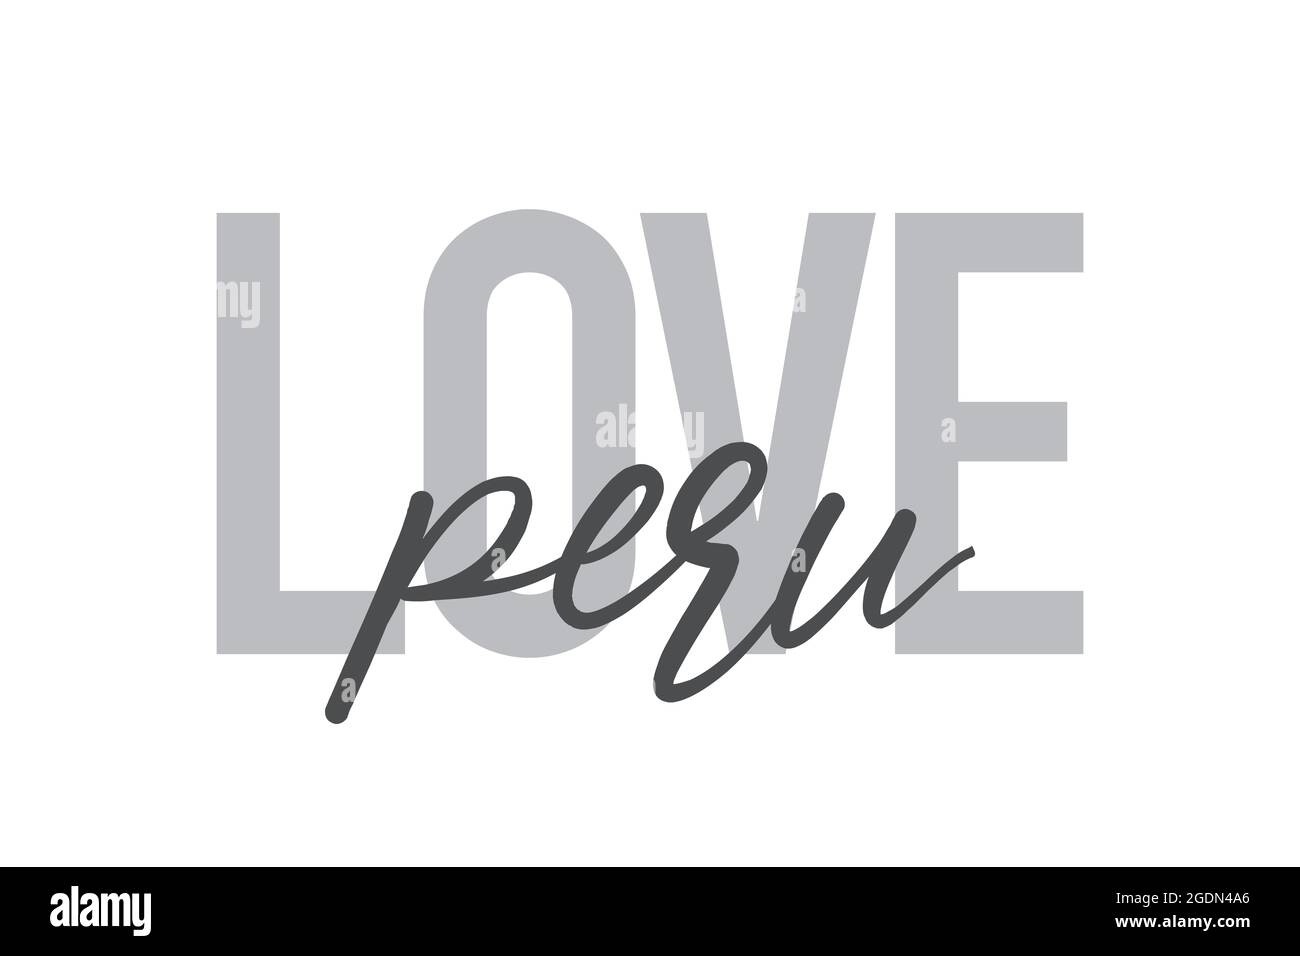 Modern, simple, minimal typographic design of a saying 'Love Peru' in tones of grey color. Cool, urban, trendy and playful graphic vector art with han Stock Photo